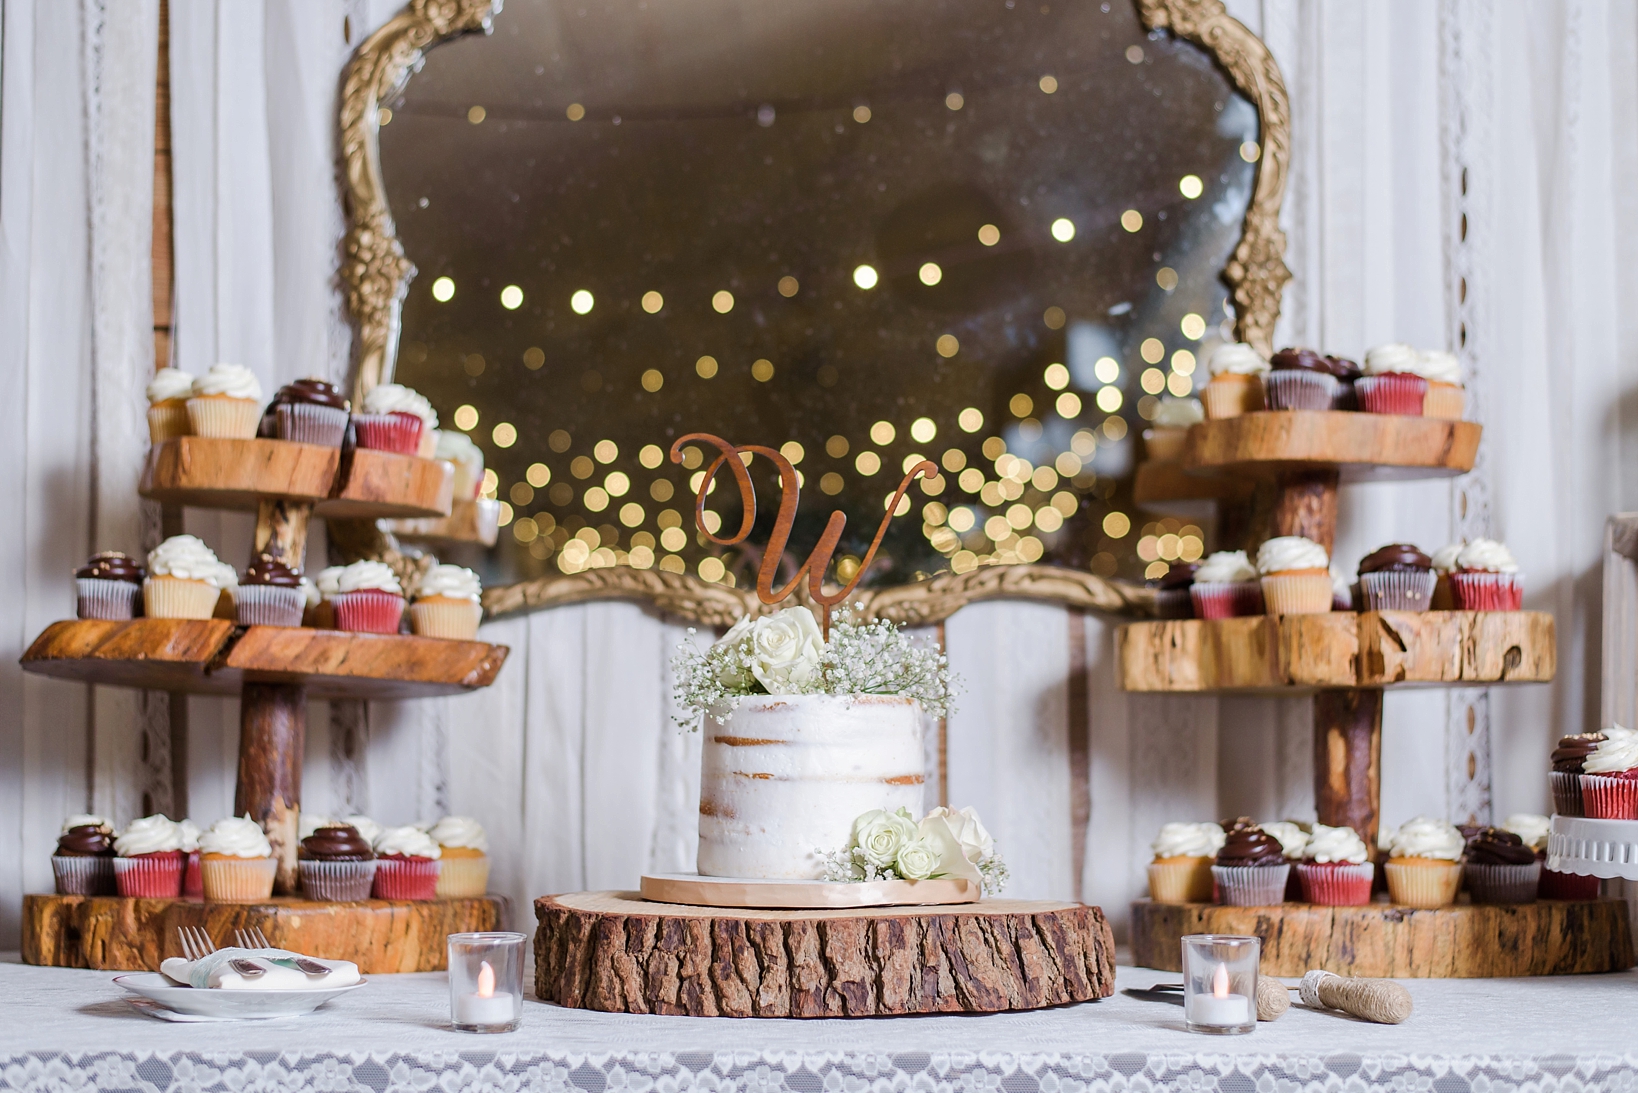 Wedding cake and cupcakes against a rustic mirror during the wedding reception by Sarah and Ben Photo